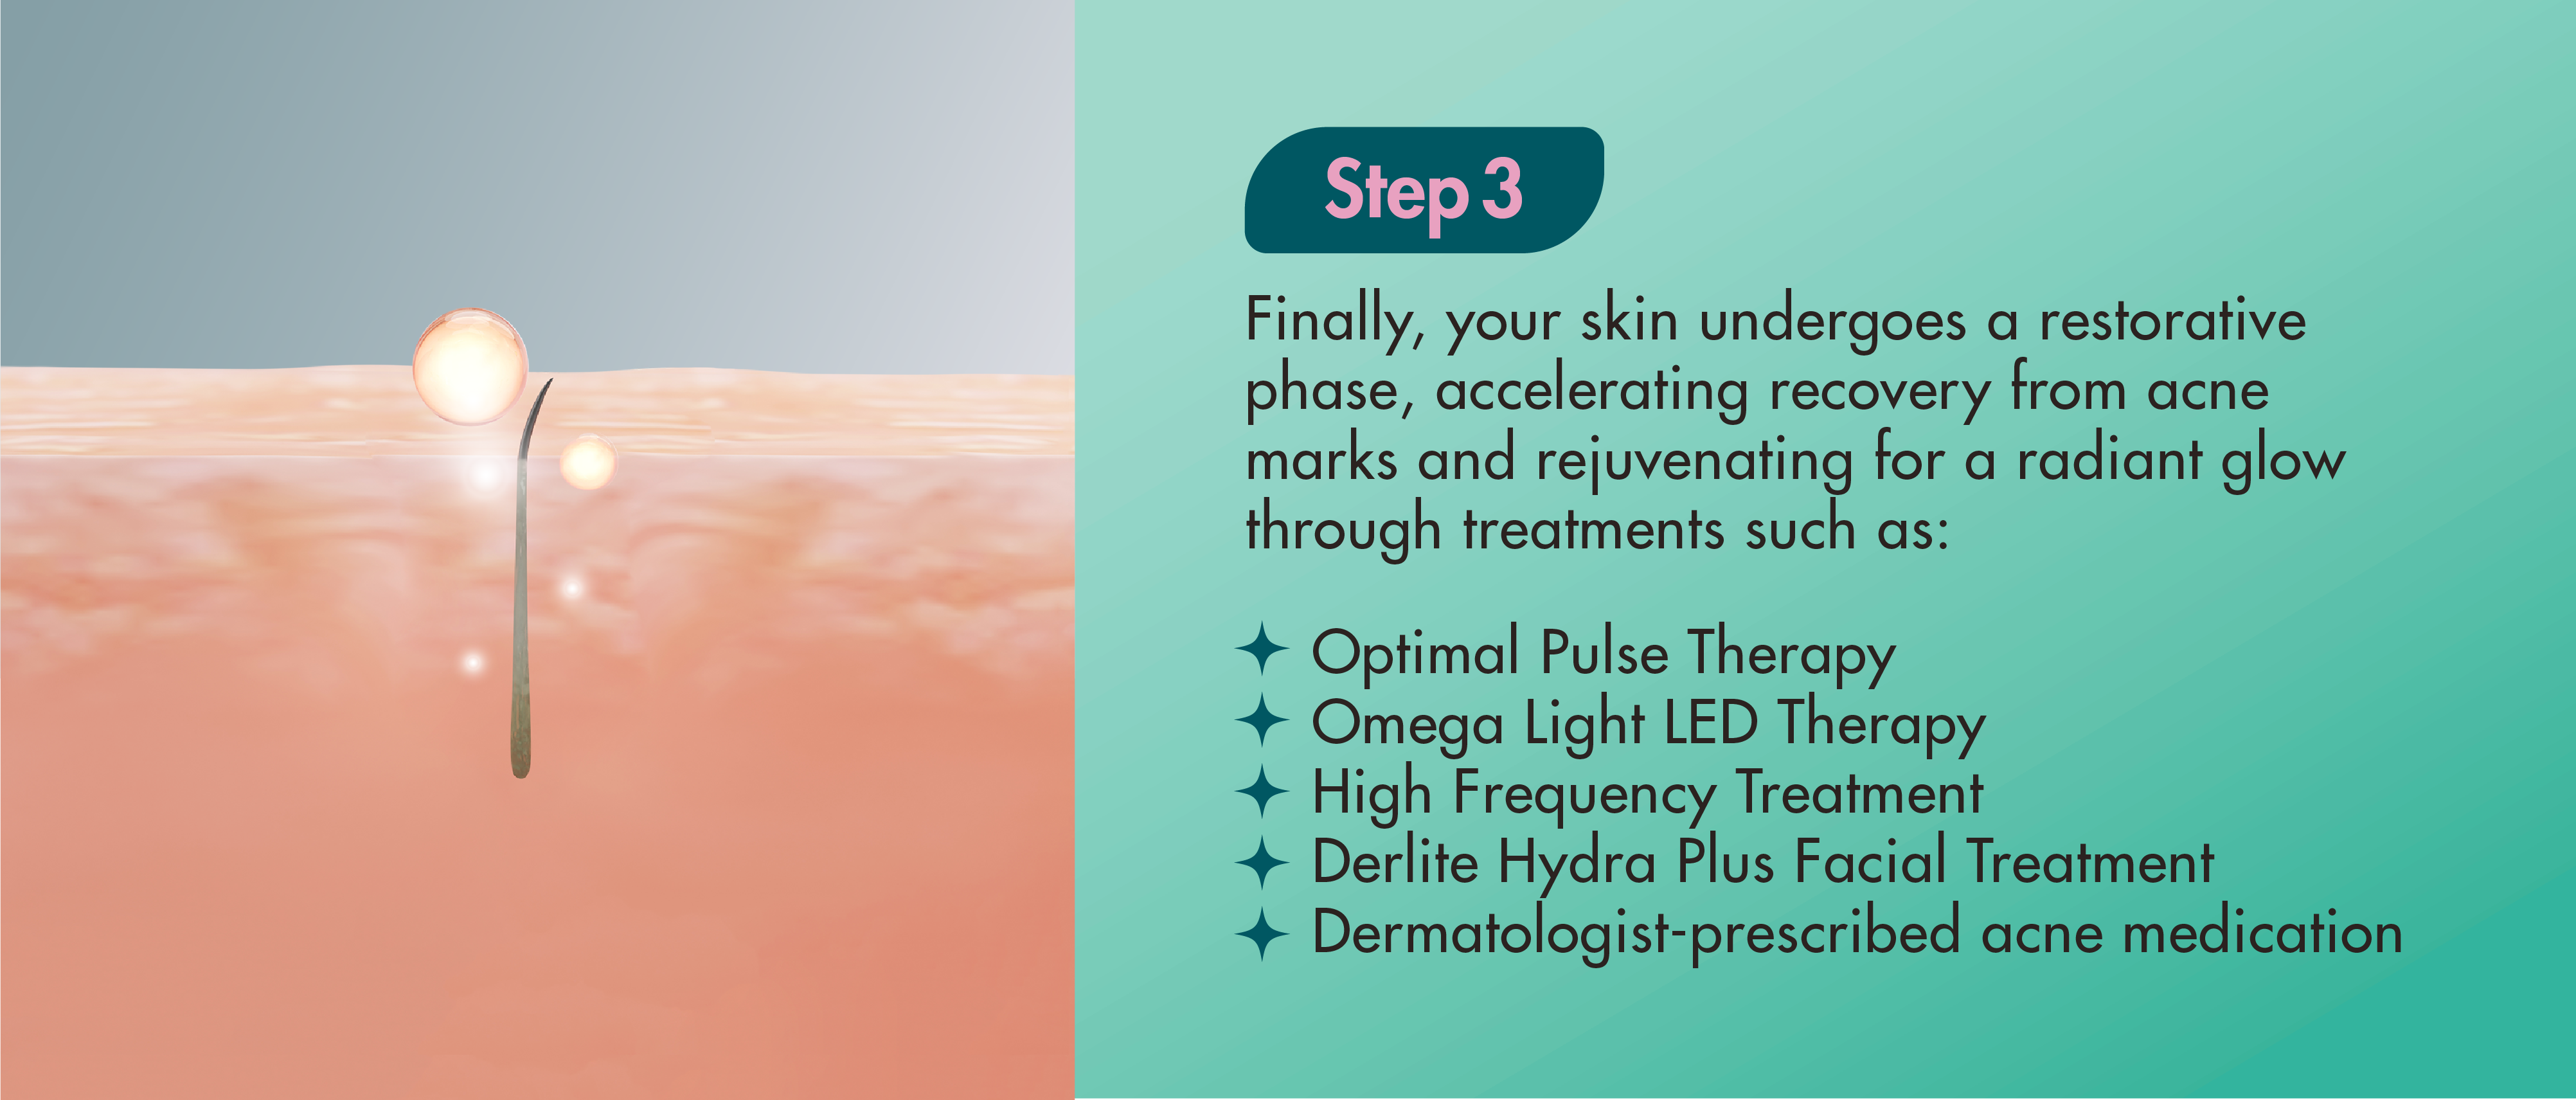 Finally, your skin undergoes a restorative phase, accelerating recovery from acne marks and rejuvenating for a radiant glow through treatments such as: Optimal Pulse Therapy Omega Light LED Therapy 4 High Frequency Treatment + Derlite Hydra Plus Facial Treatment + Dermatologist-prescribed acne medication